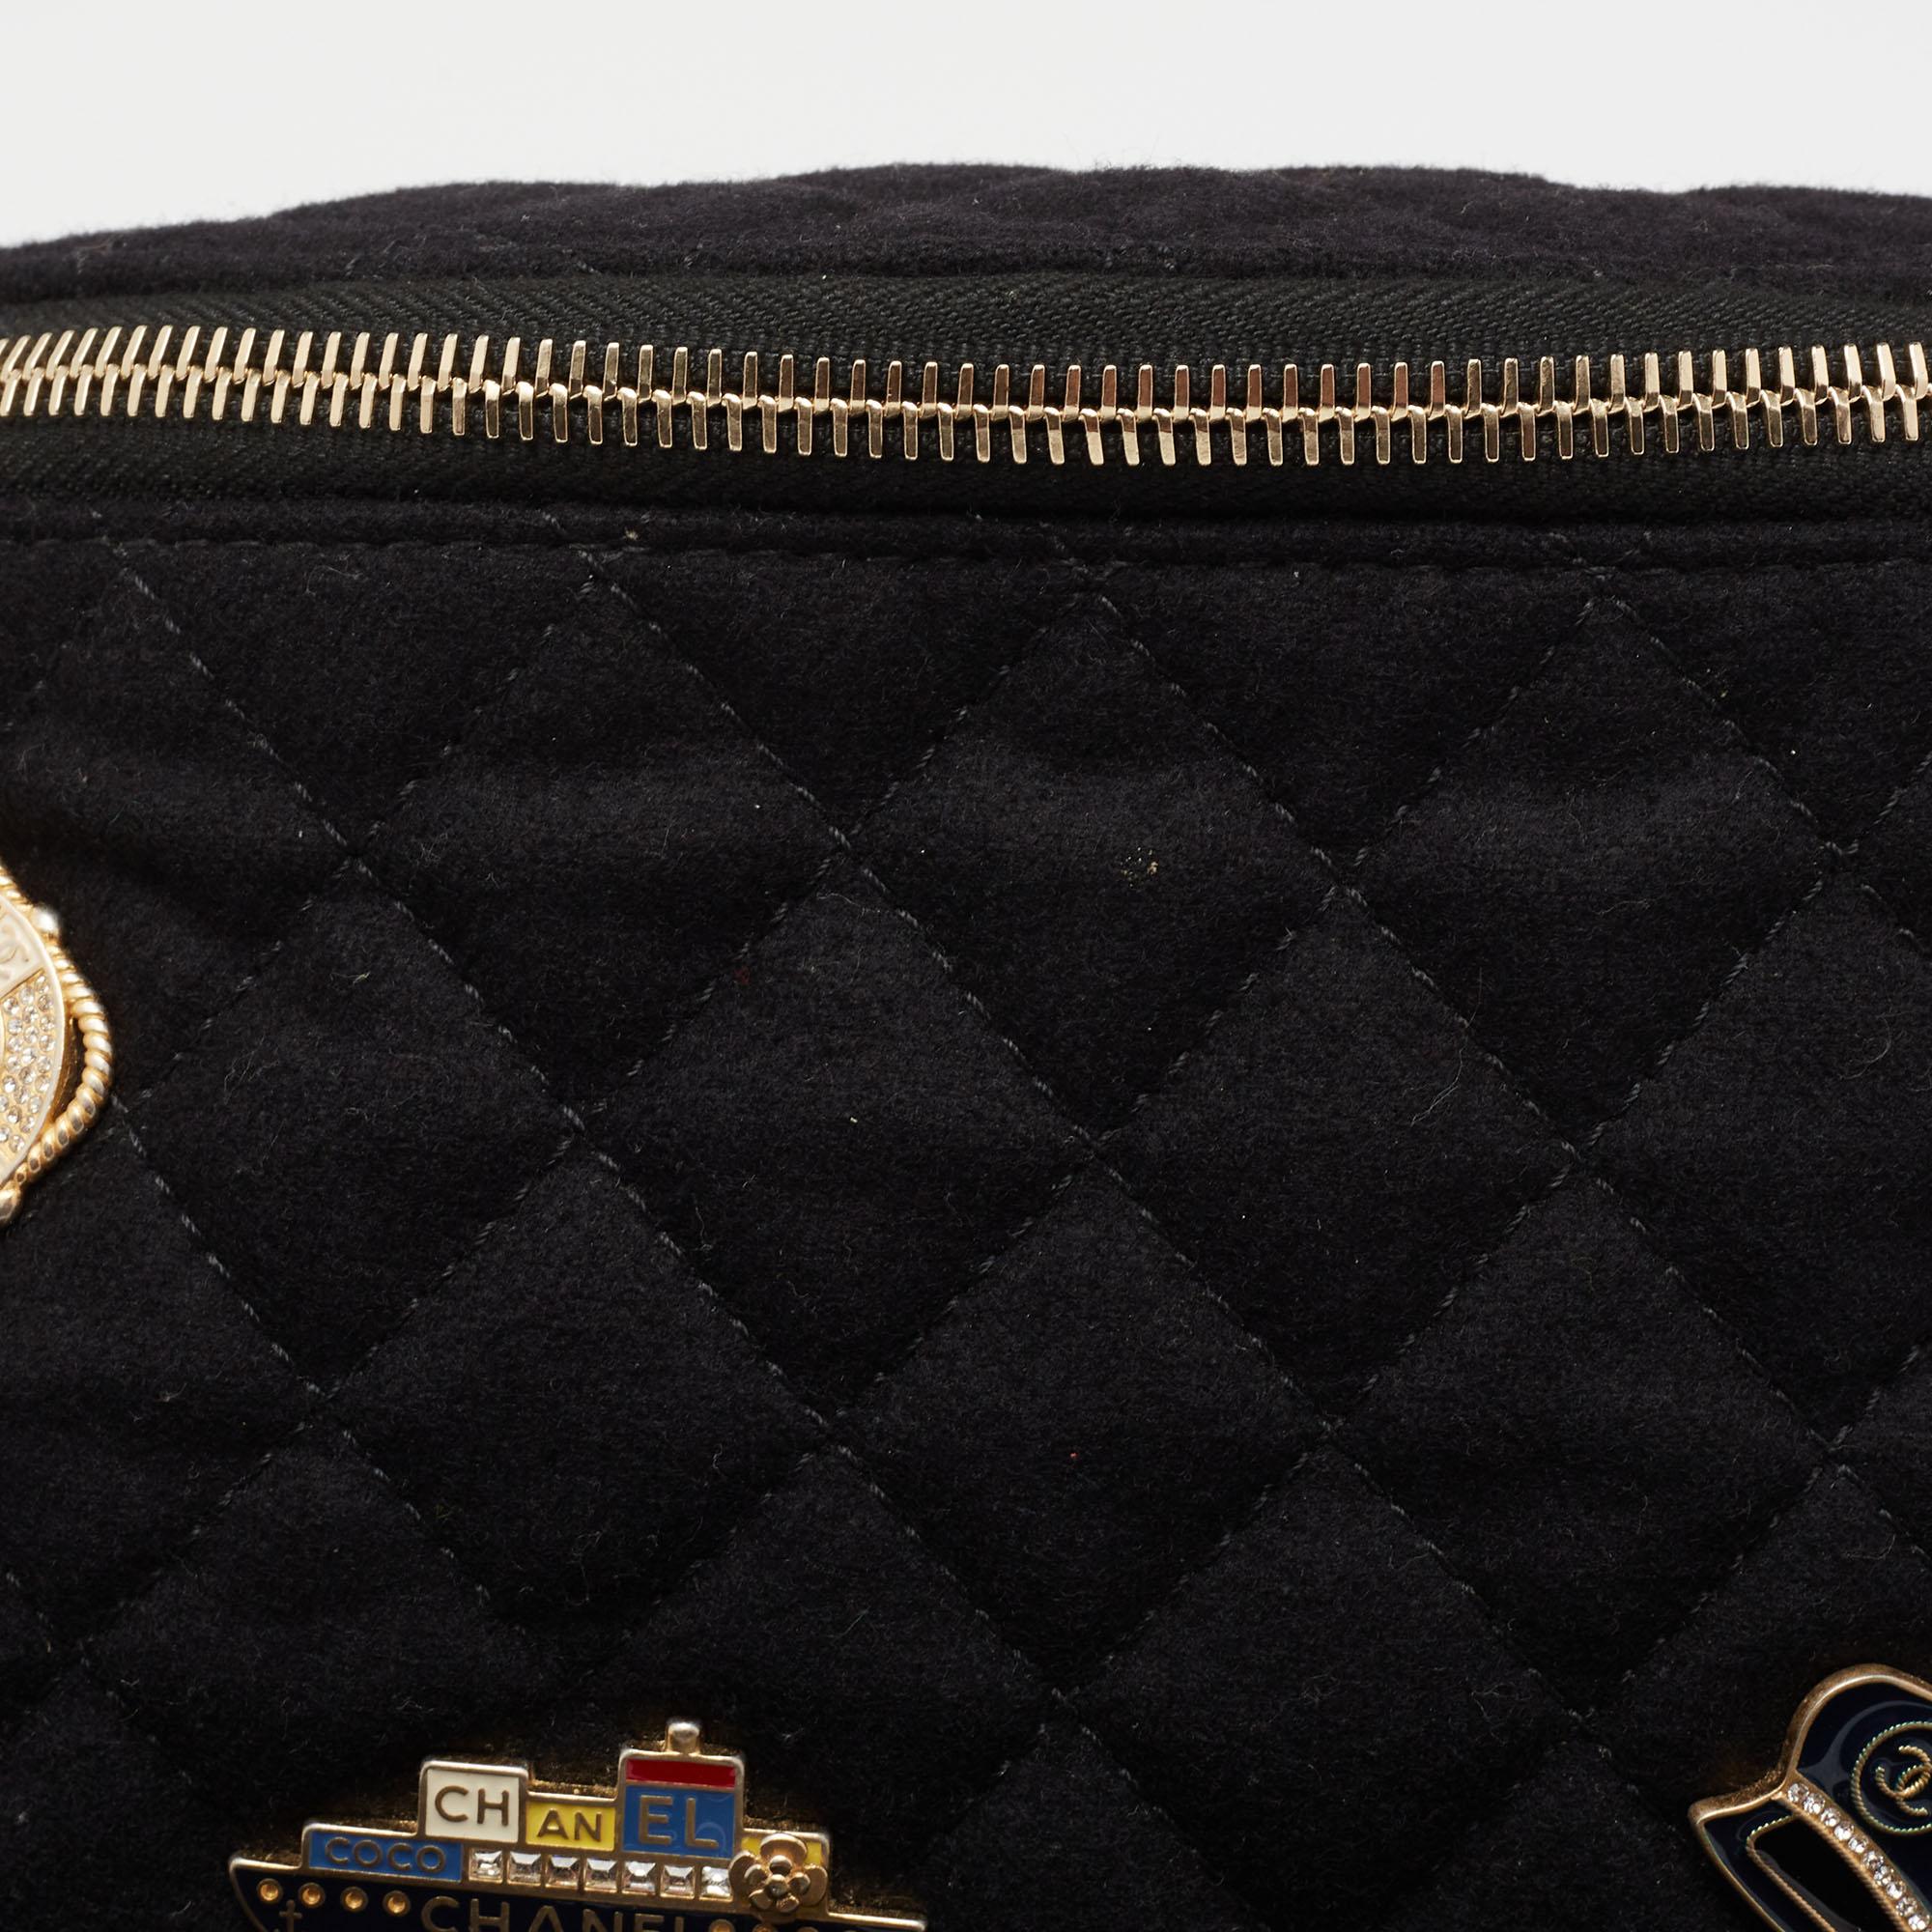 Chanel Black Quilted Fabric and Leather Paris Hamburg Charm Belt Bag 2